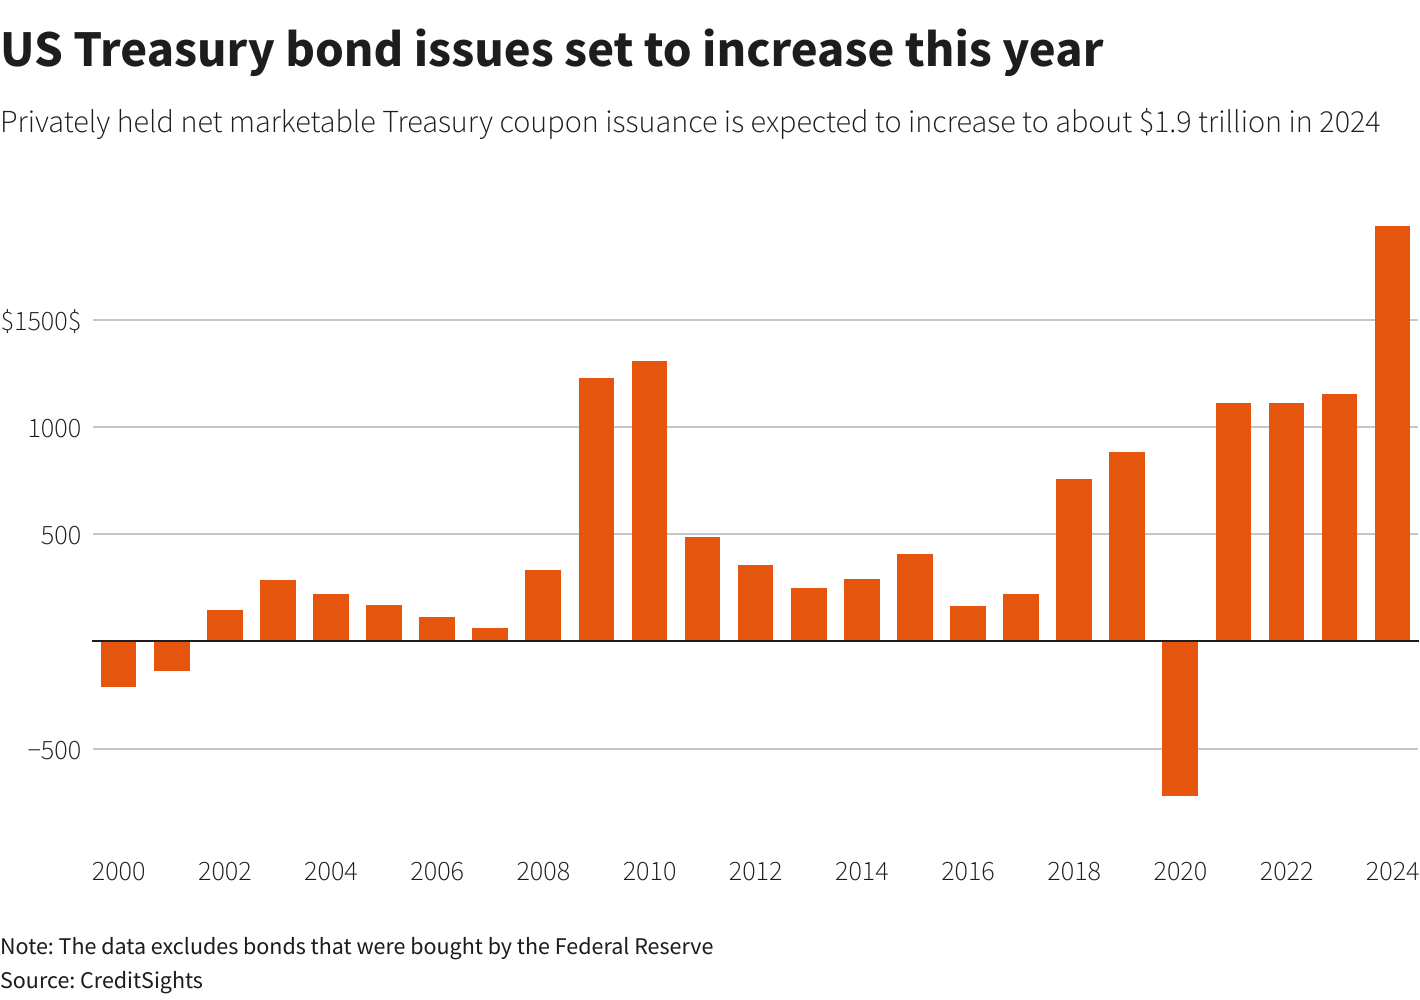 Chart: annual US treasury bond issuances from 2000 to 2024 (expected).